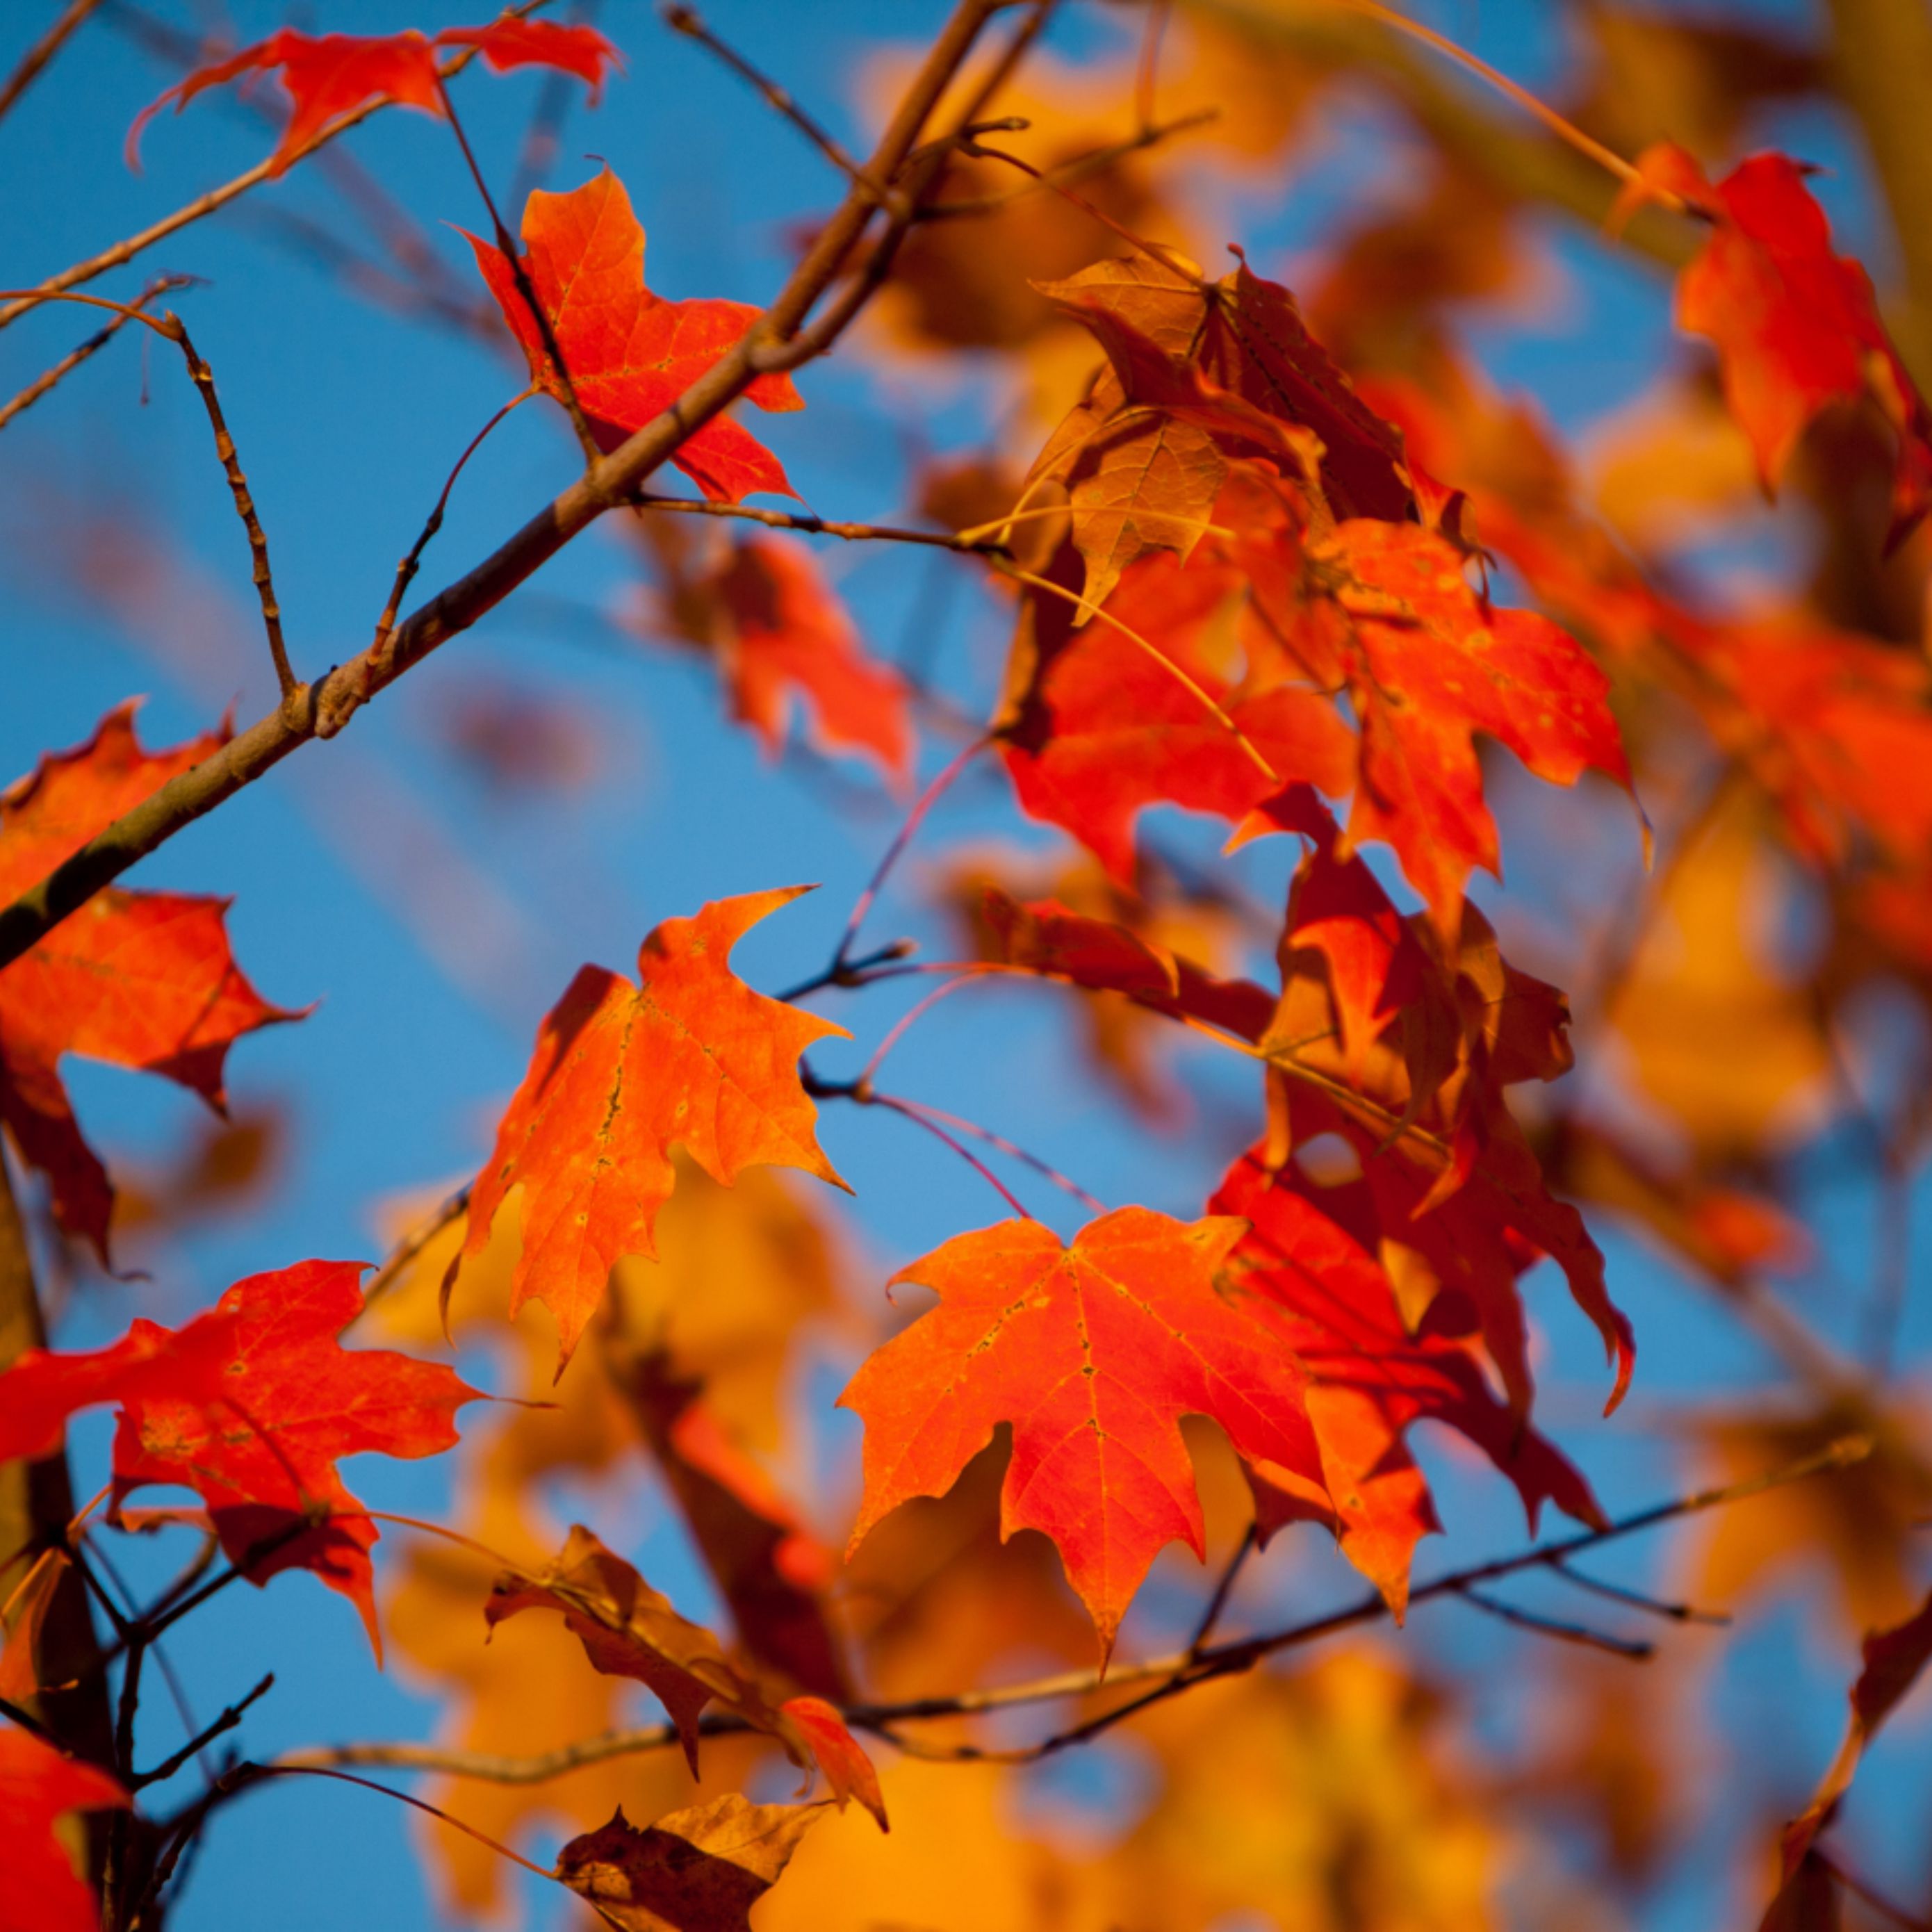 Download wallpaper 2780x2780 autumn, leaves, maple, branches, blur ipad air, ipad air ipad ipad ipad mini ipad mini ipad mini ipad pro 9.7 for parallax HD background